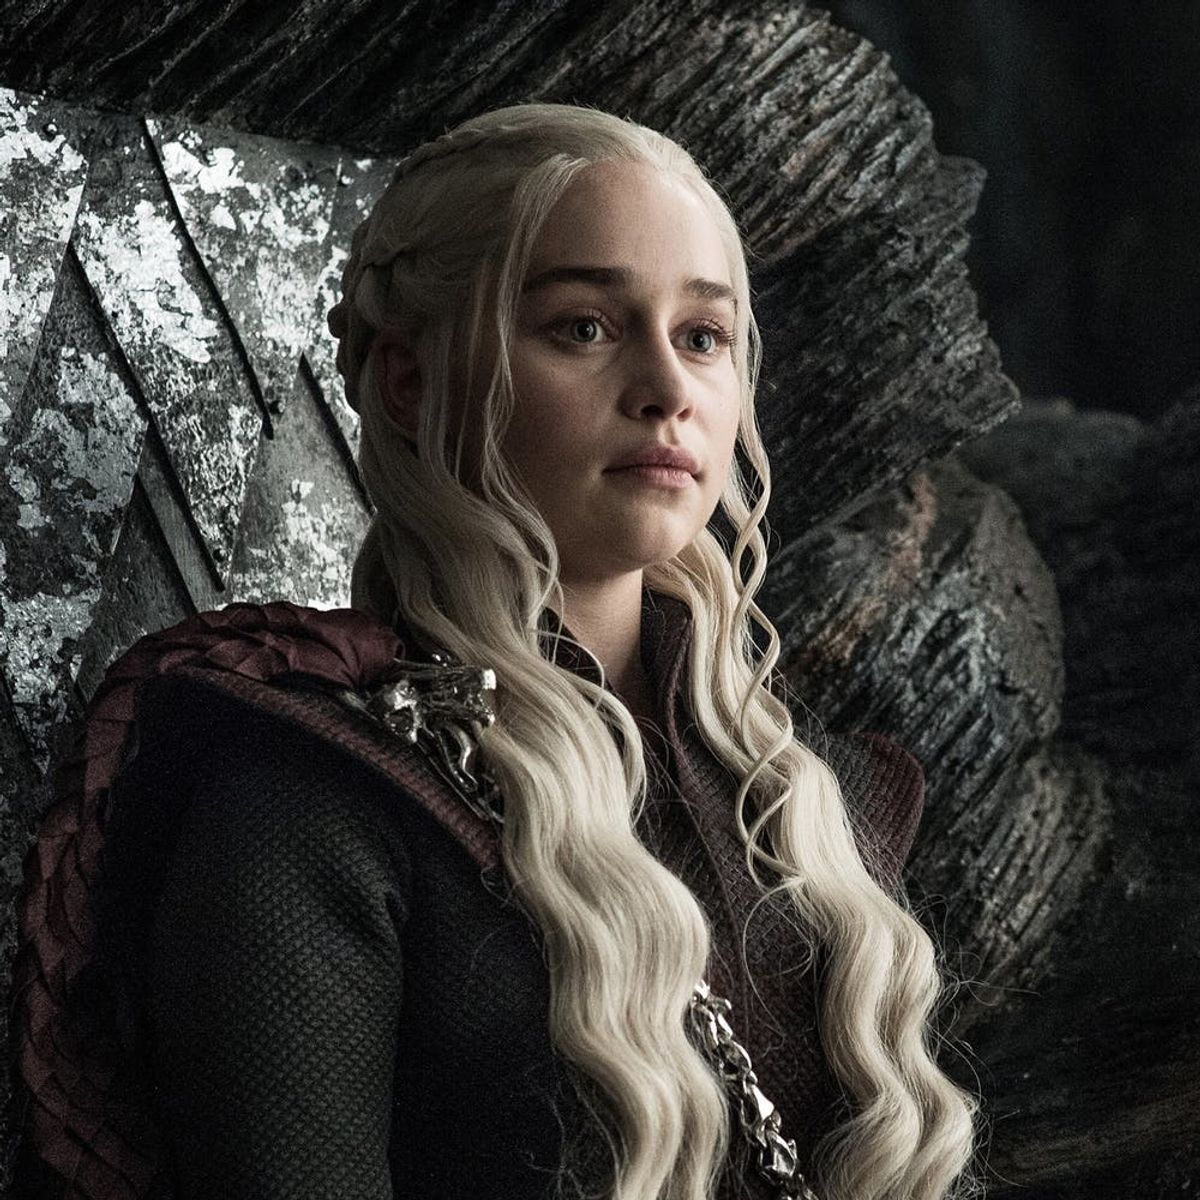 HBO Says ‘Game of Thrones’ Is Probably Going to Kill Off All Your Favorite Characters in Season 8